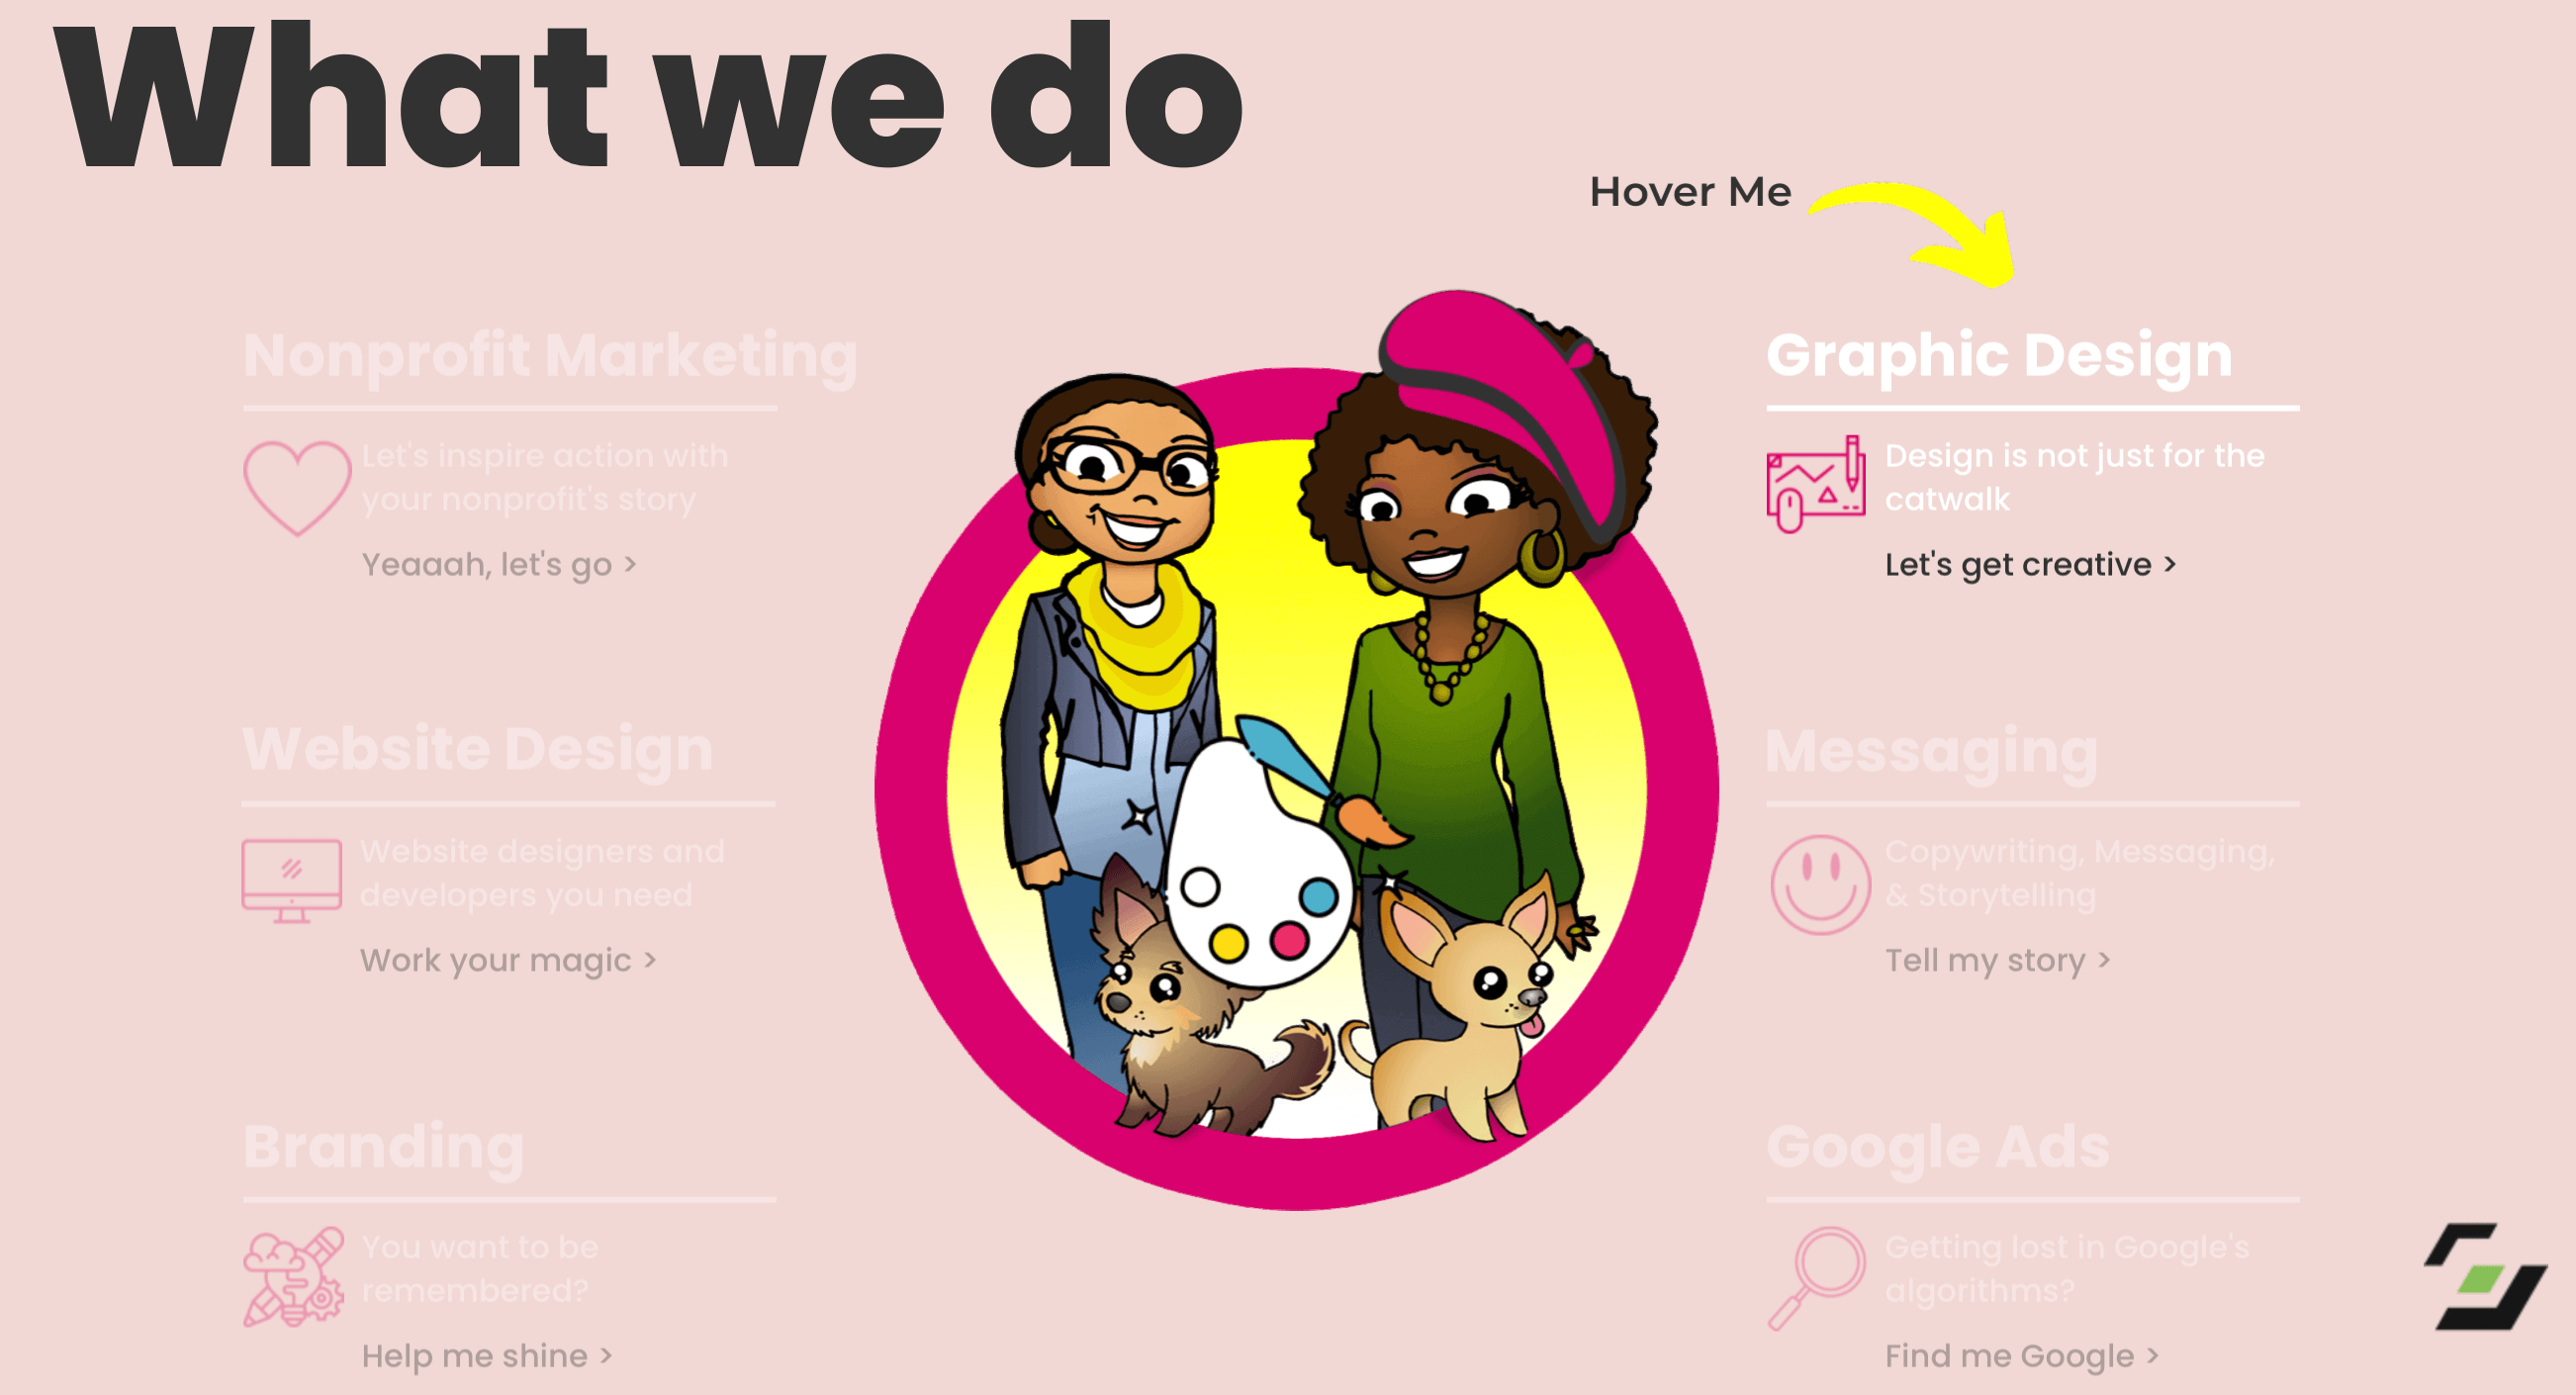 What we do section screenshot on Puzzle Pieces Marketing Website. Cartoon in middle with services provided surrounding the cartoon. Light pink background with micro-interactions being showcased in website design.